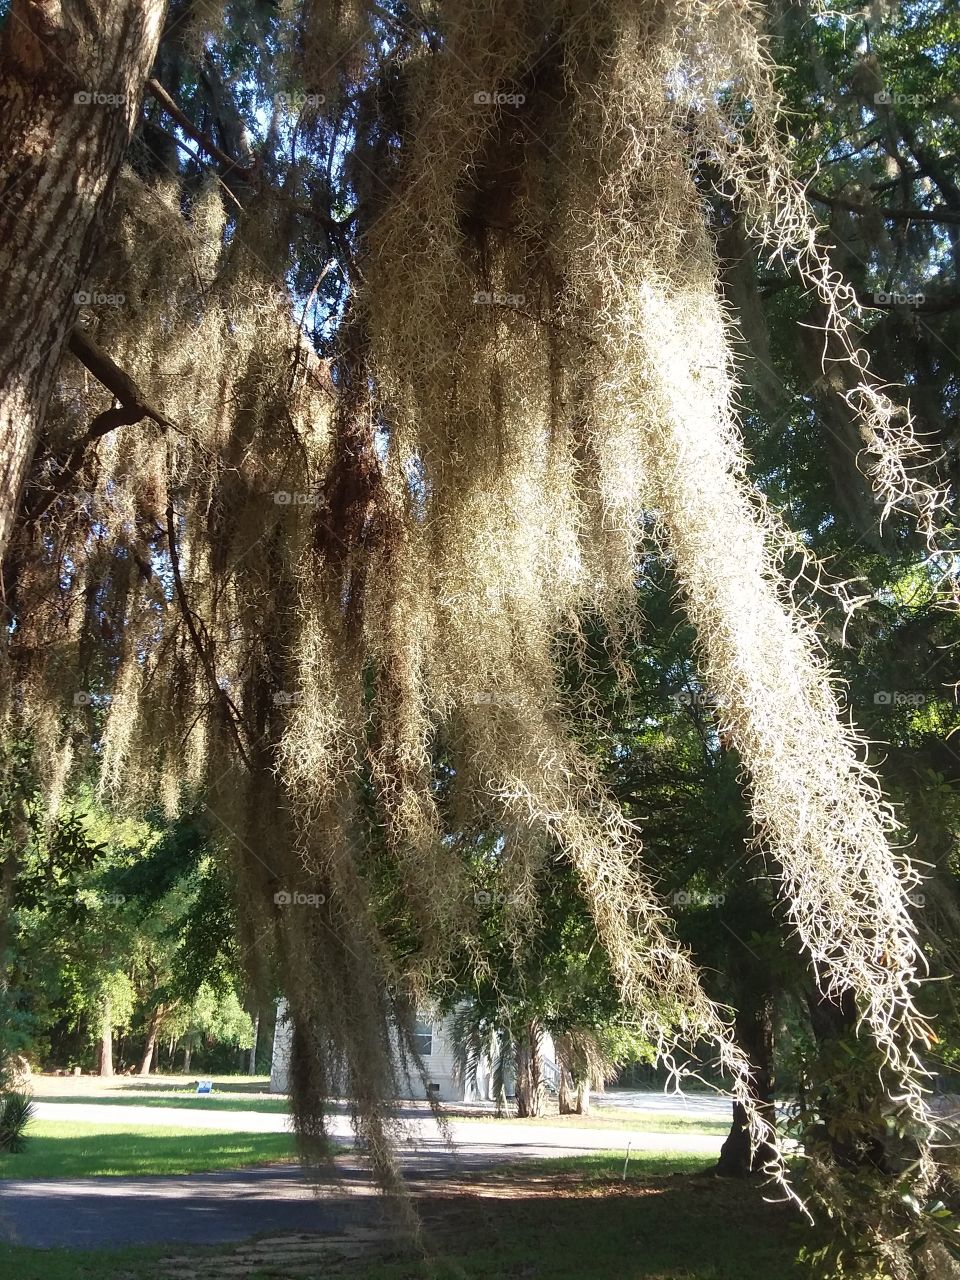 It's a perfect afternoon to shoot the Spanish Moss and Live Oaks